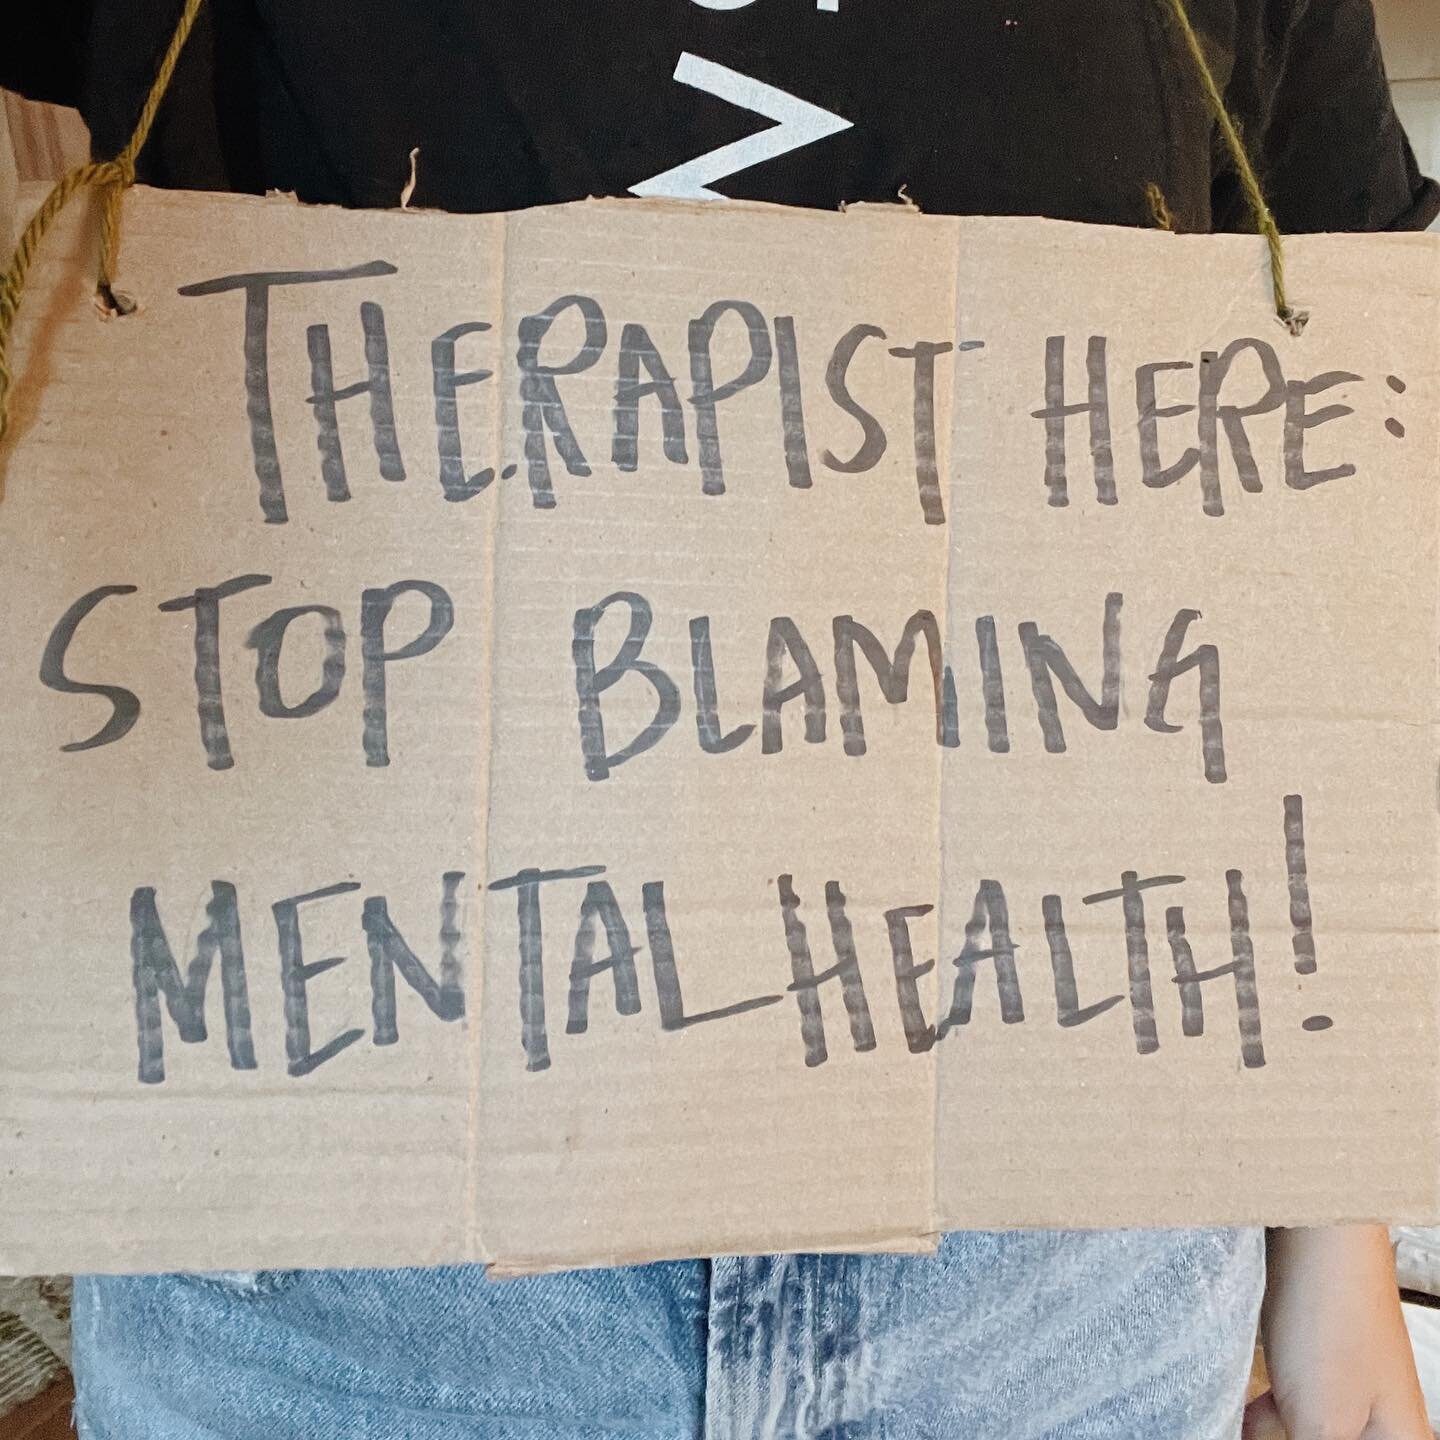 Met a few other therapists, former therapists, &amp; behavioral health workers at @marchforourlives, &amp; had some great conversations with folks about gun violence and the narratives around mental health.

A few notes: 1% of psychiatric patients ev